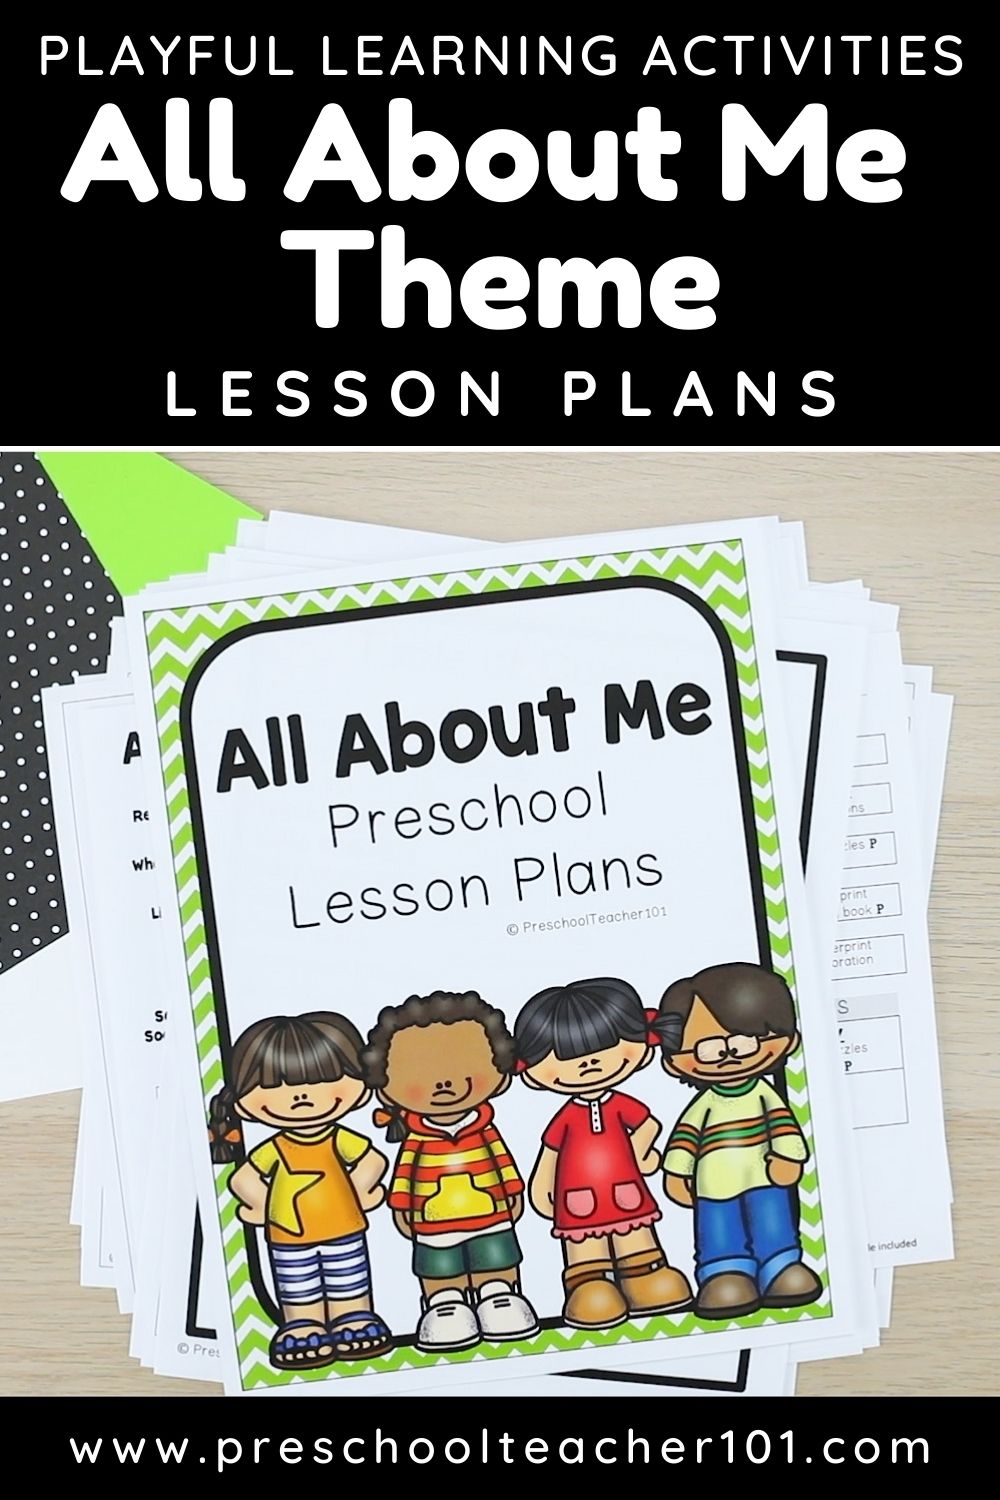 Playful Learning Activities - All About Me